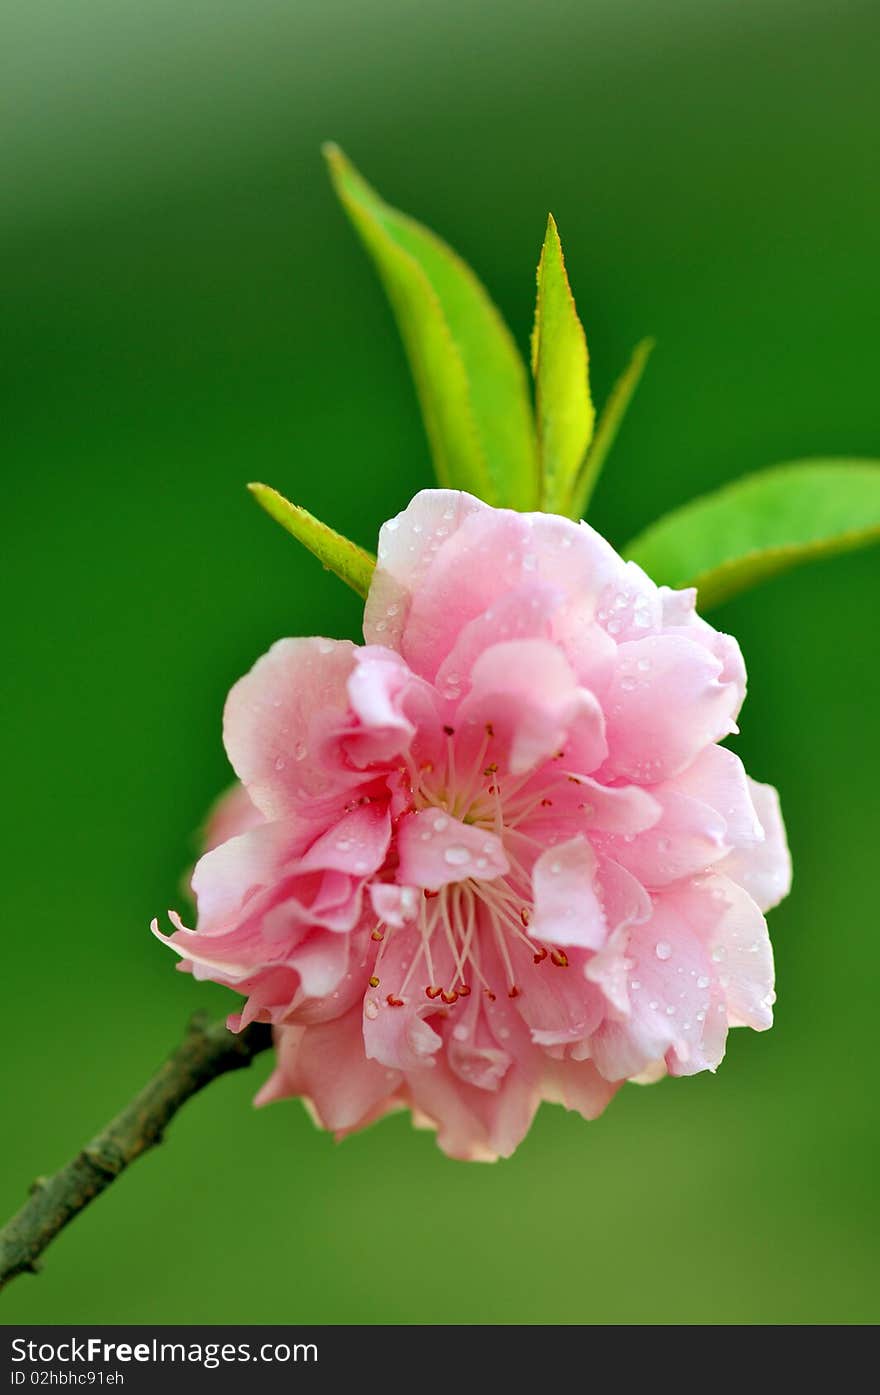 Pink flower close-up with green background. In Chinese, flower in bloom symbolizes richness on the way. Pink flower close-up with green background. In Chinese, flower in bloom symbolizes richness on the way.